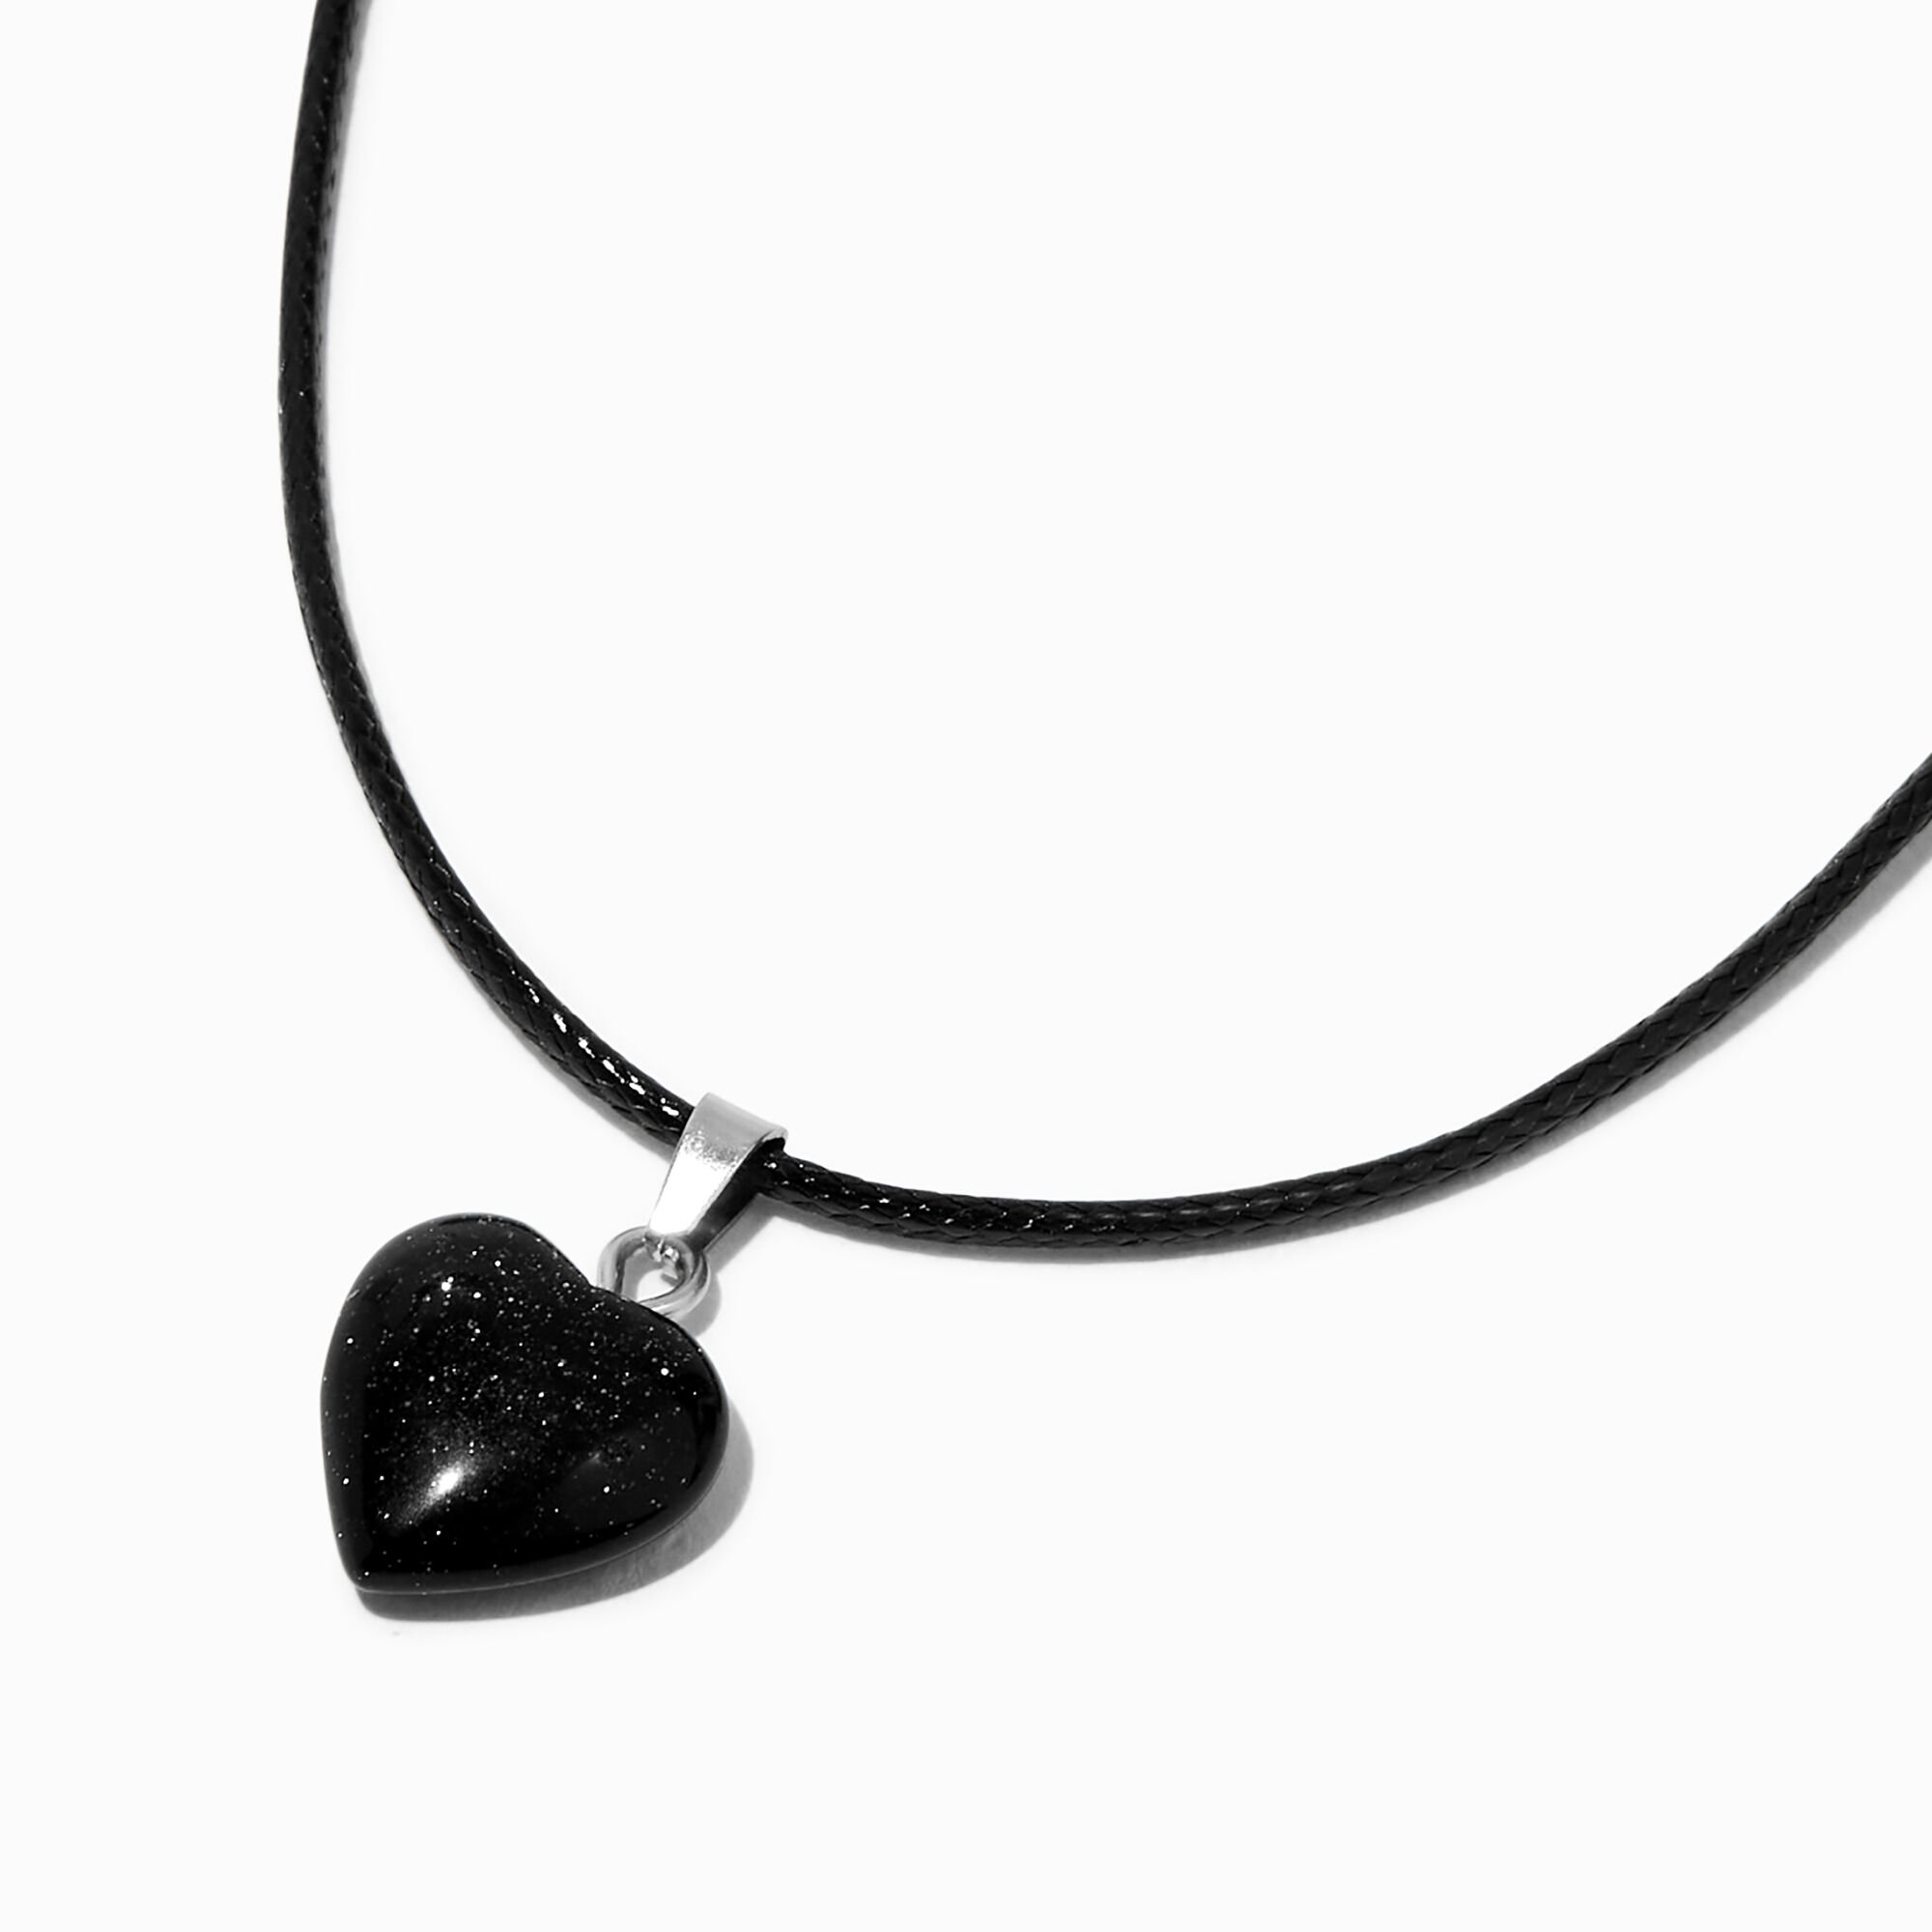 View Claires Puffy Heart Cord Pendant Necklace Black information